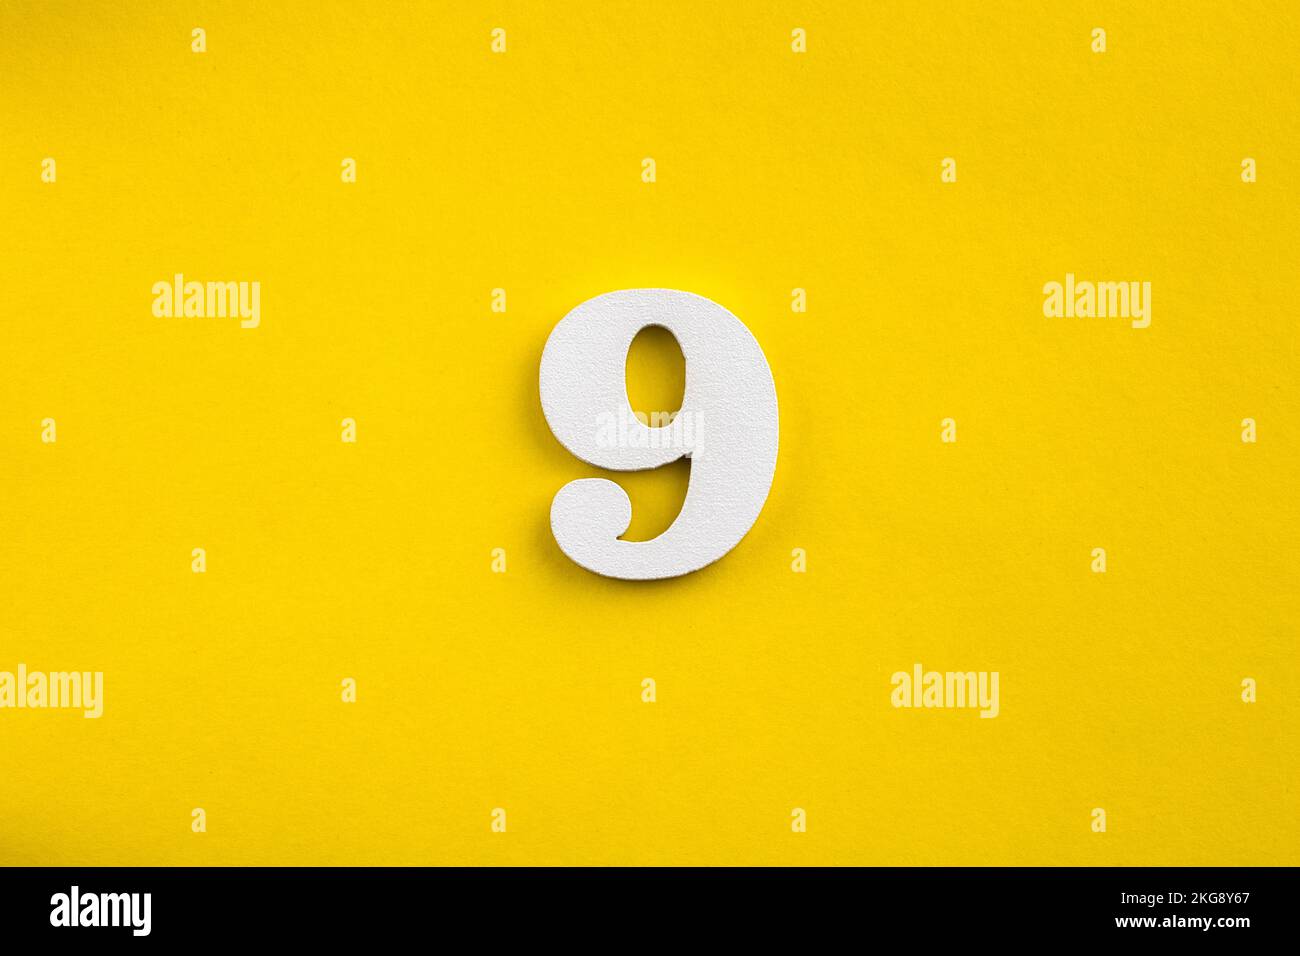 Number 9 - White wooden number on yellow background Stock Photo - Alamy